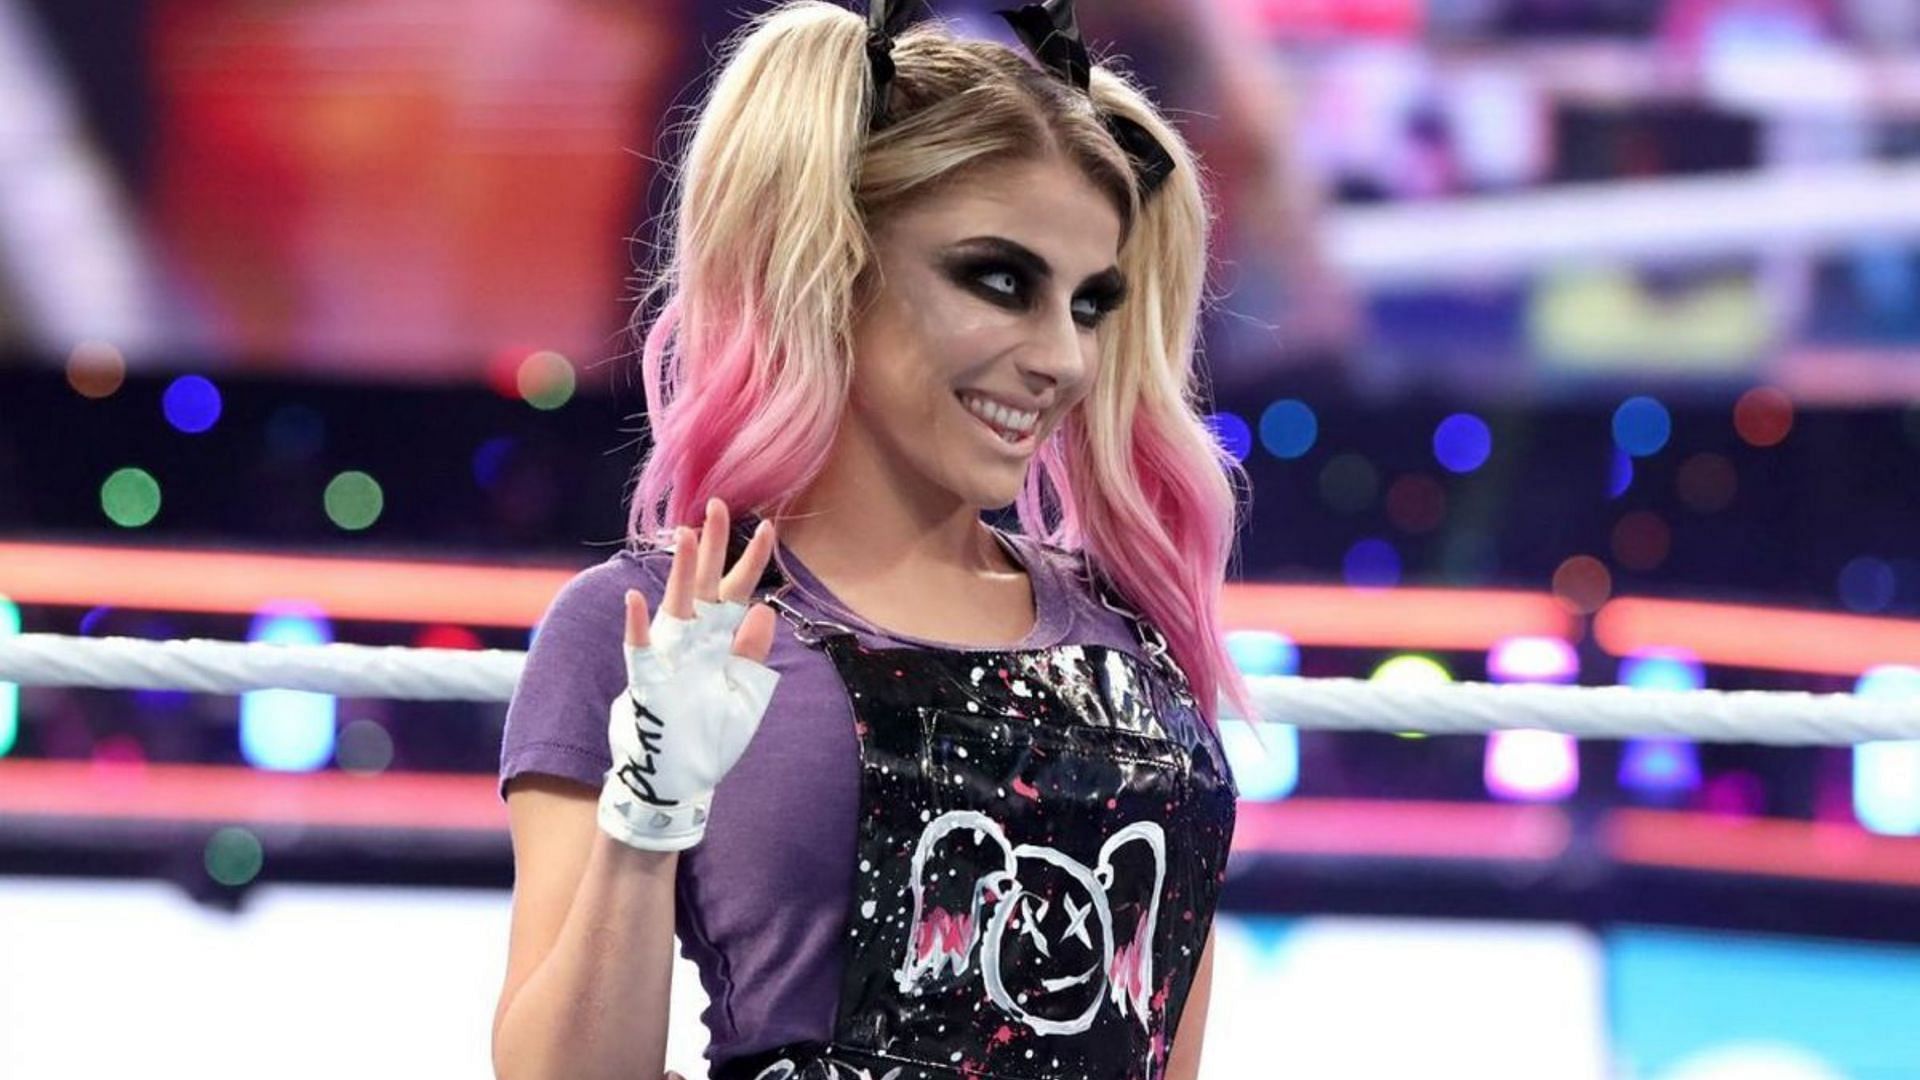 Alexa Bliss nearly lost her life when she was 15 years old